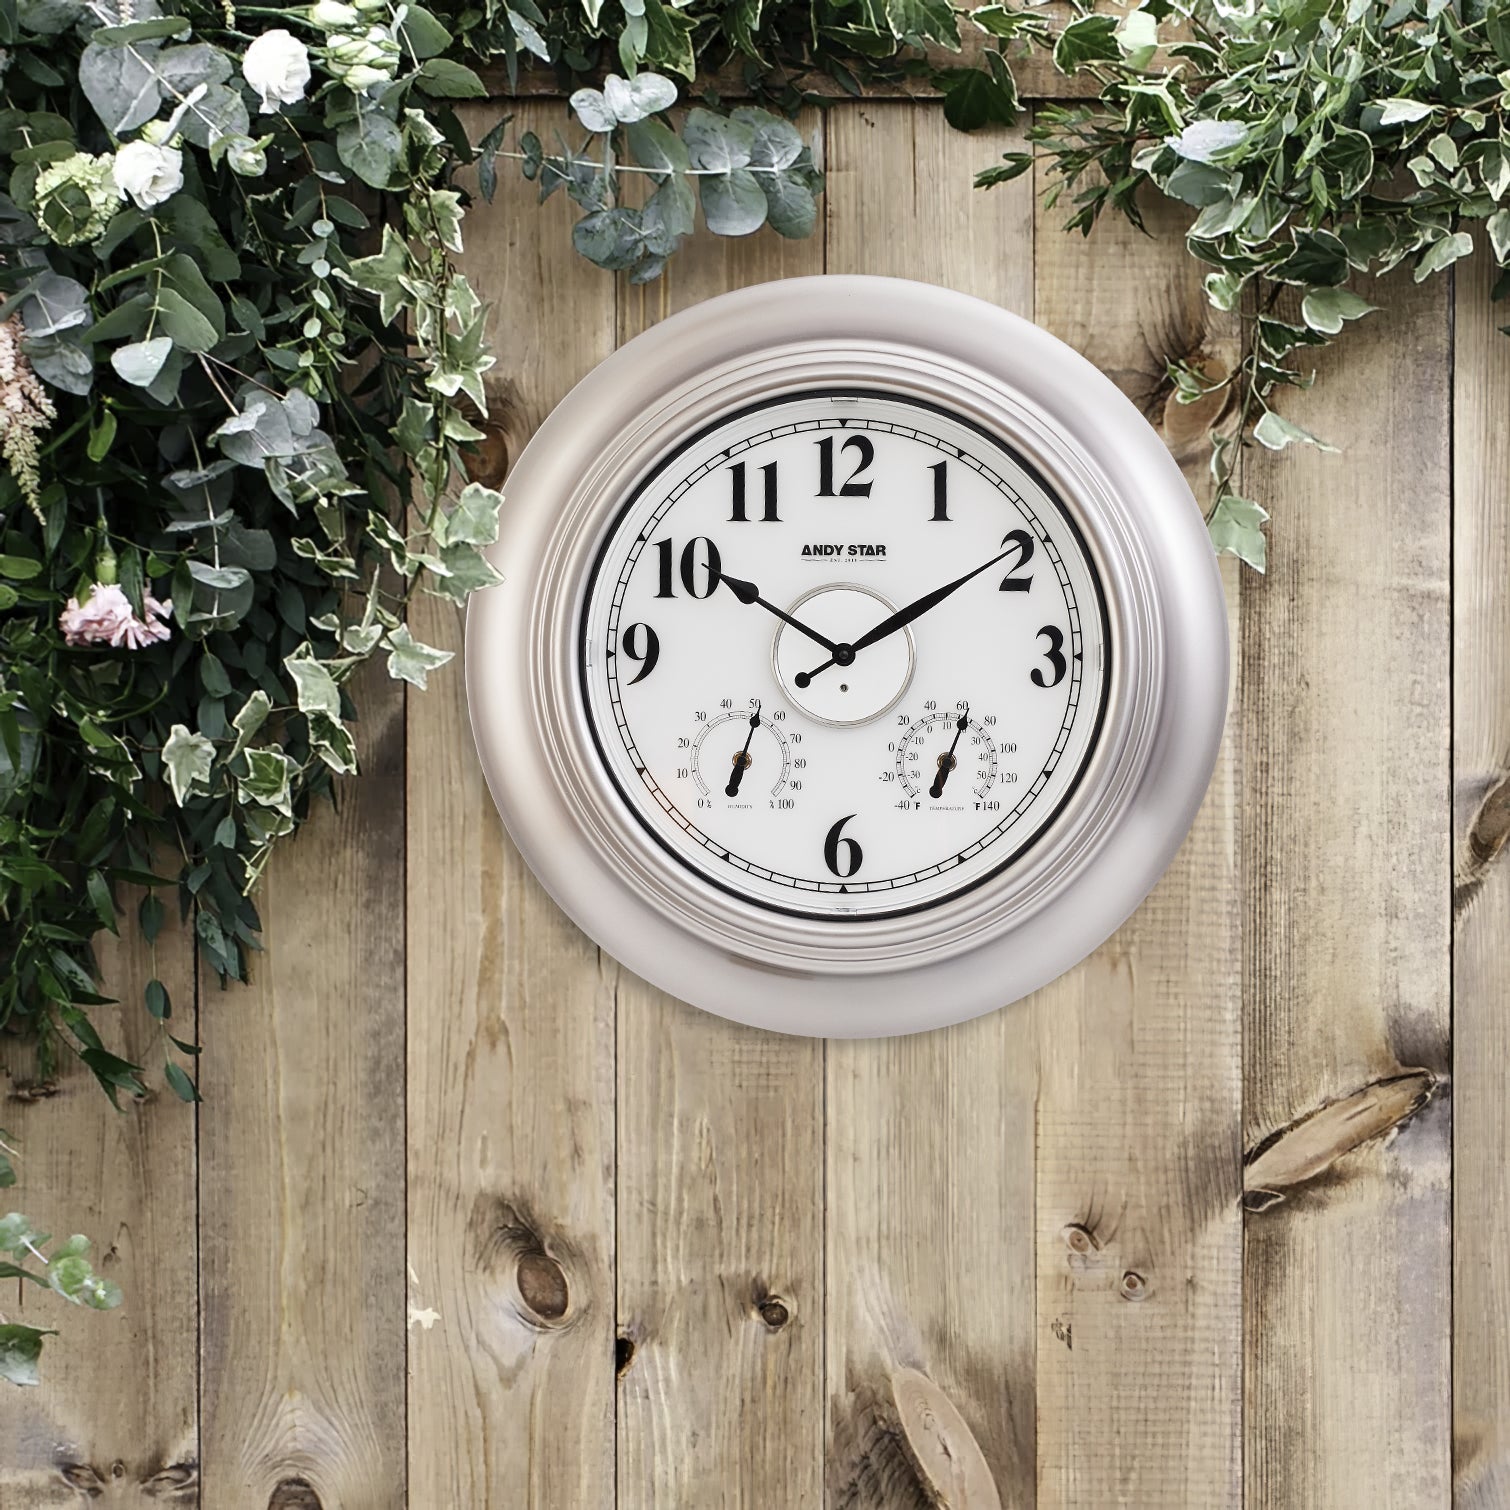 Modern Outdoor Wall Clock with Thermometer Weatherproof Large Lighted Clocks for Patio, Garden